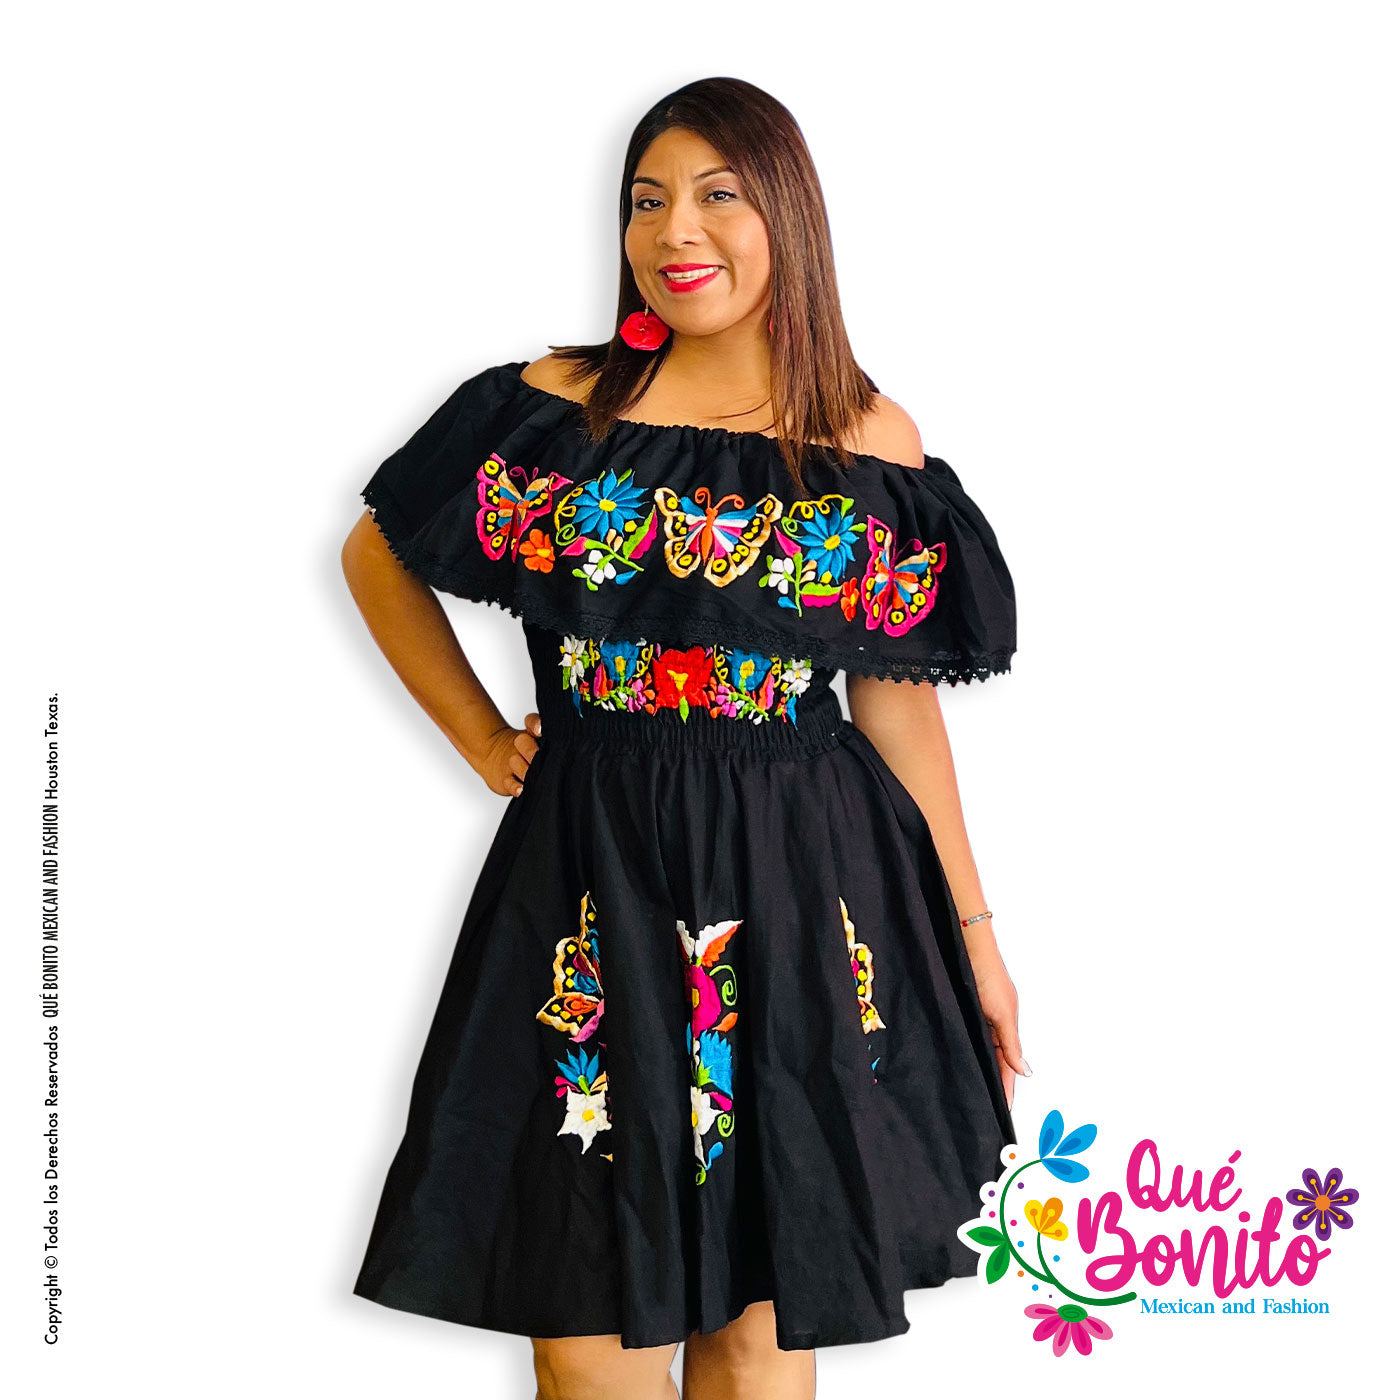 Butterfly Black Dress Que Bonito Mexican and Fashion